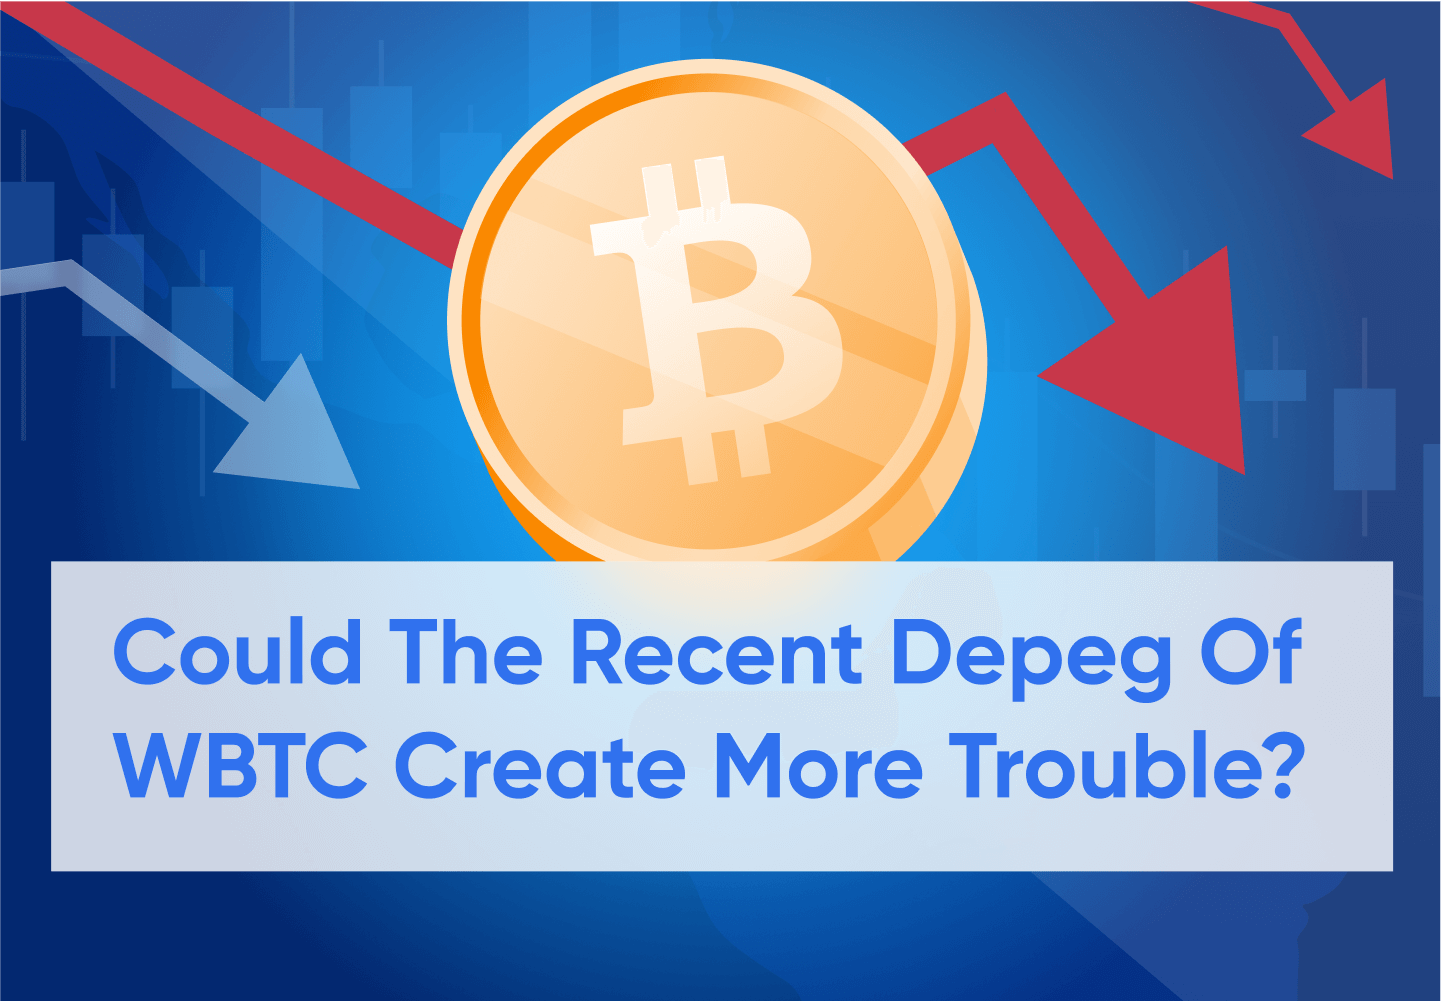 The Recent Wrapped Bitcoin Depeg Situation Explained